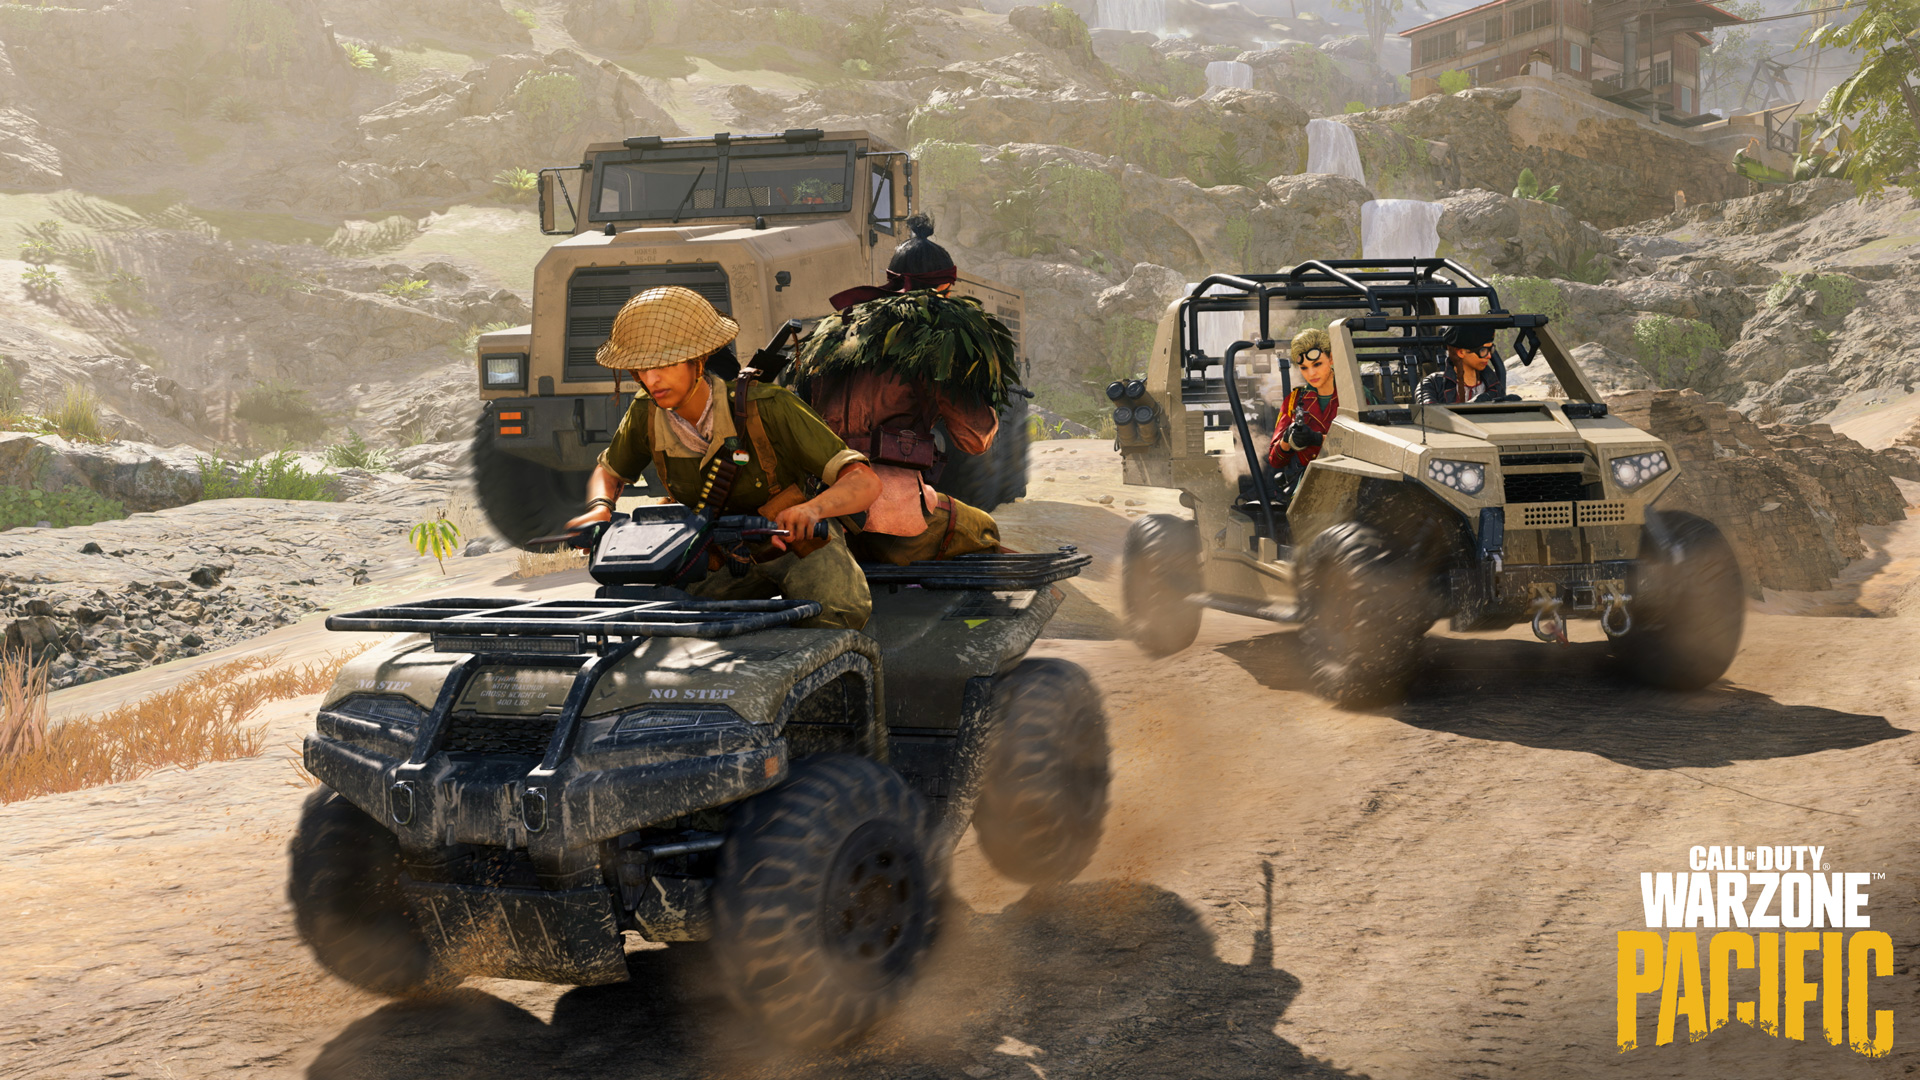 Call of Duty Warzone Pacific (Foto: Activision)